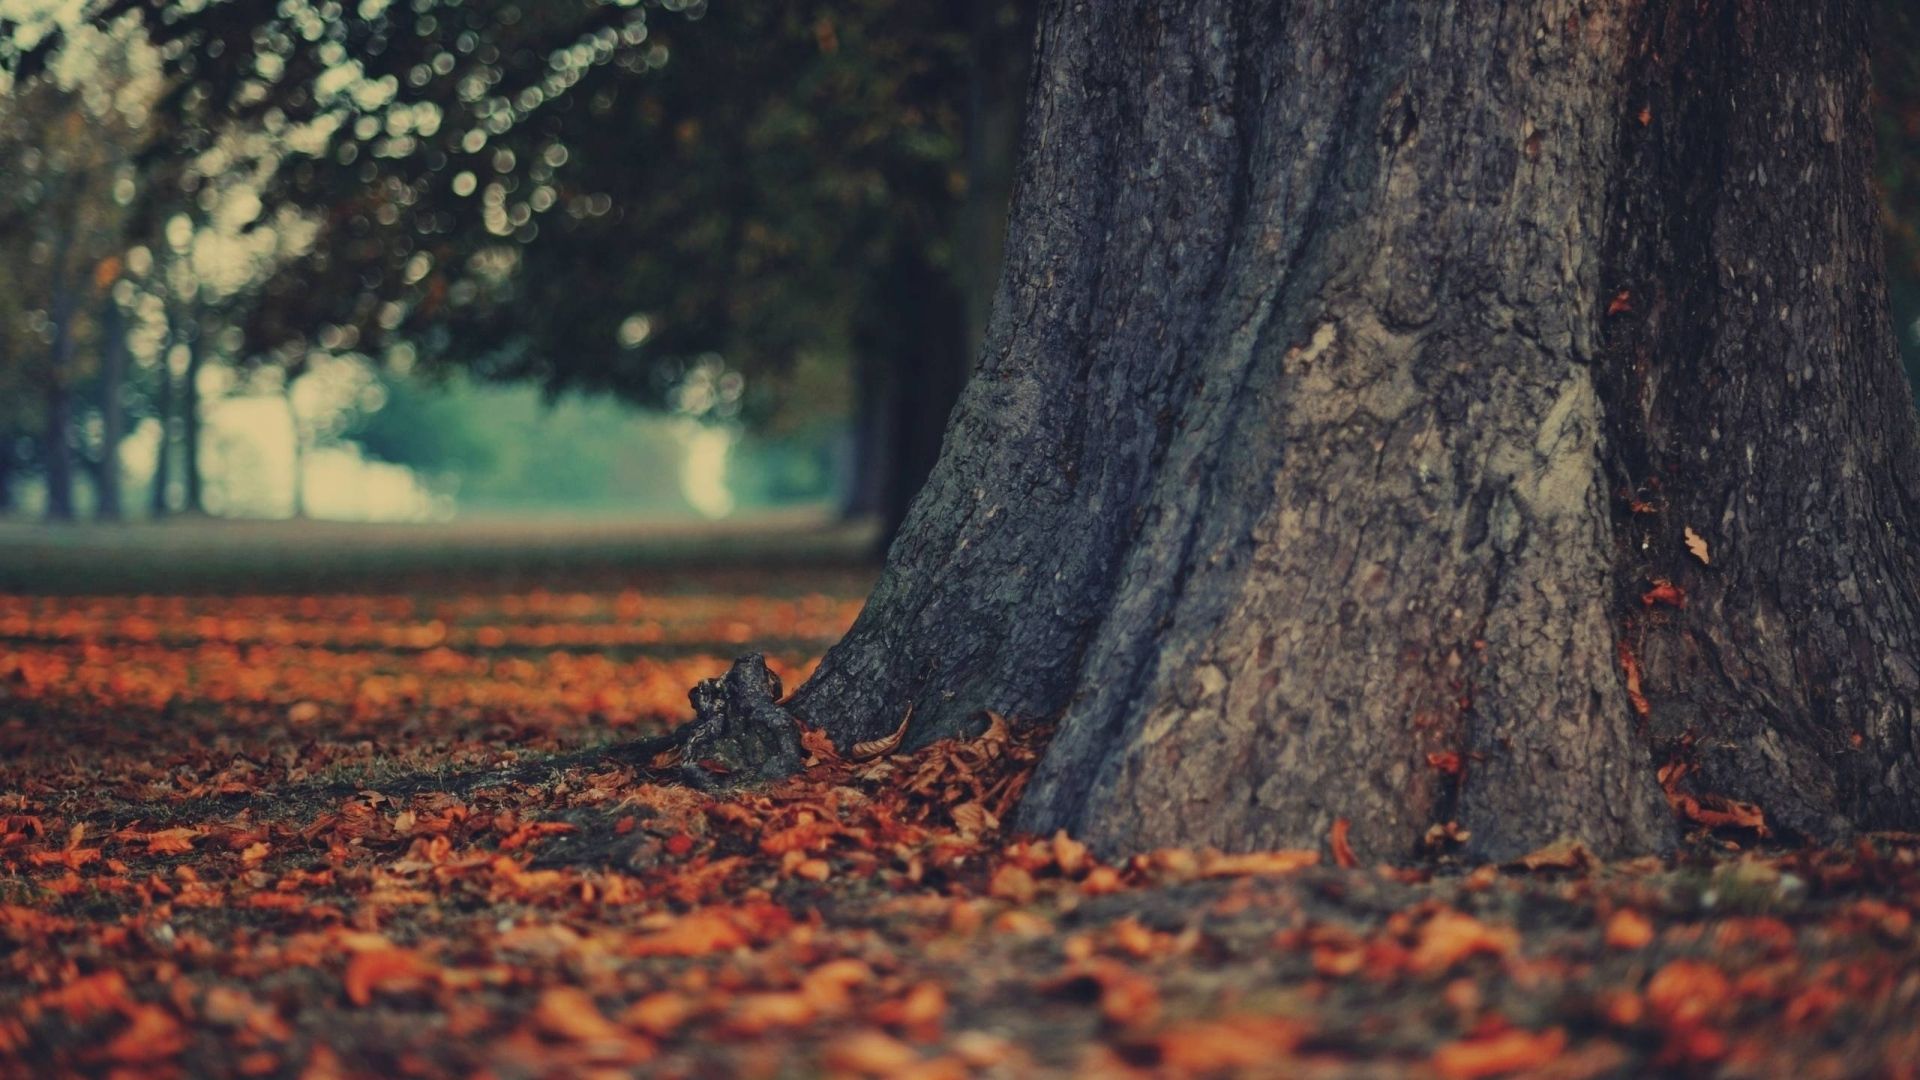 Download Wallpaper 1920x1080 Trunk, Leaves, Autumn, Earth, Tree ...